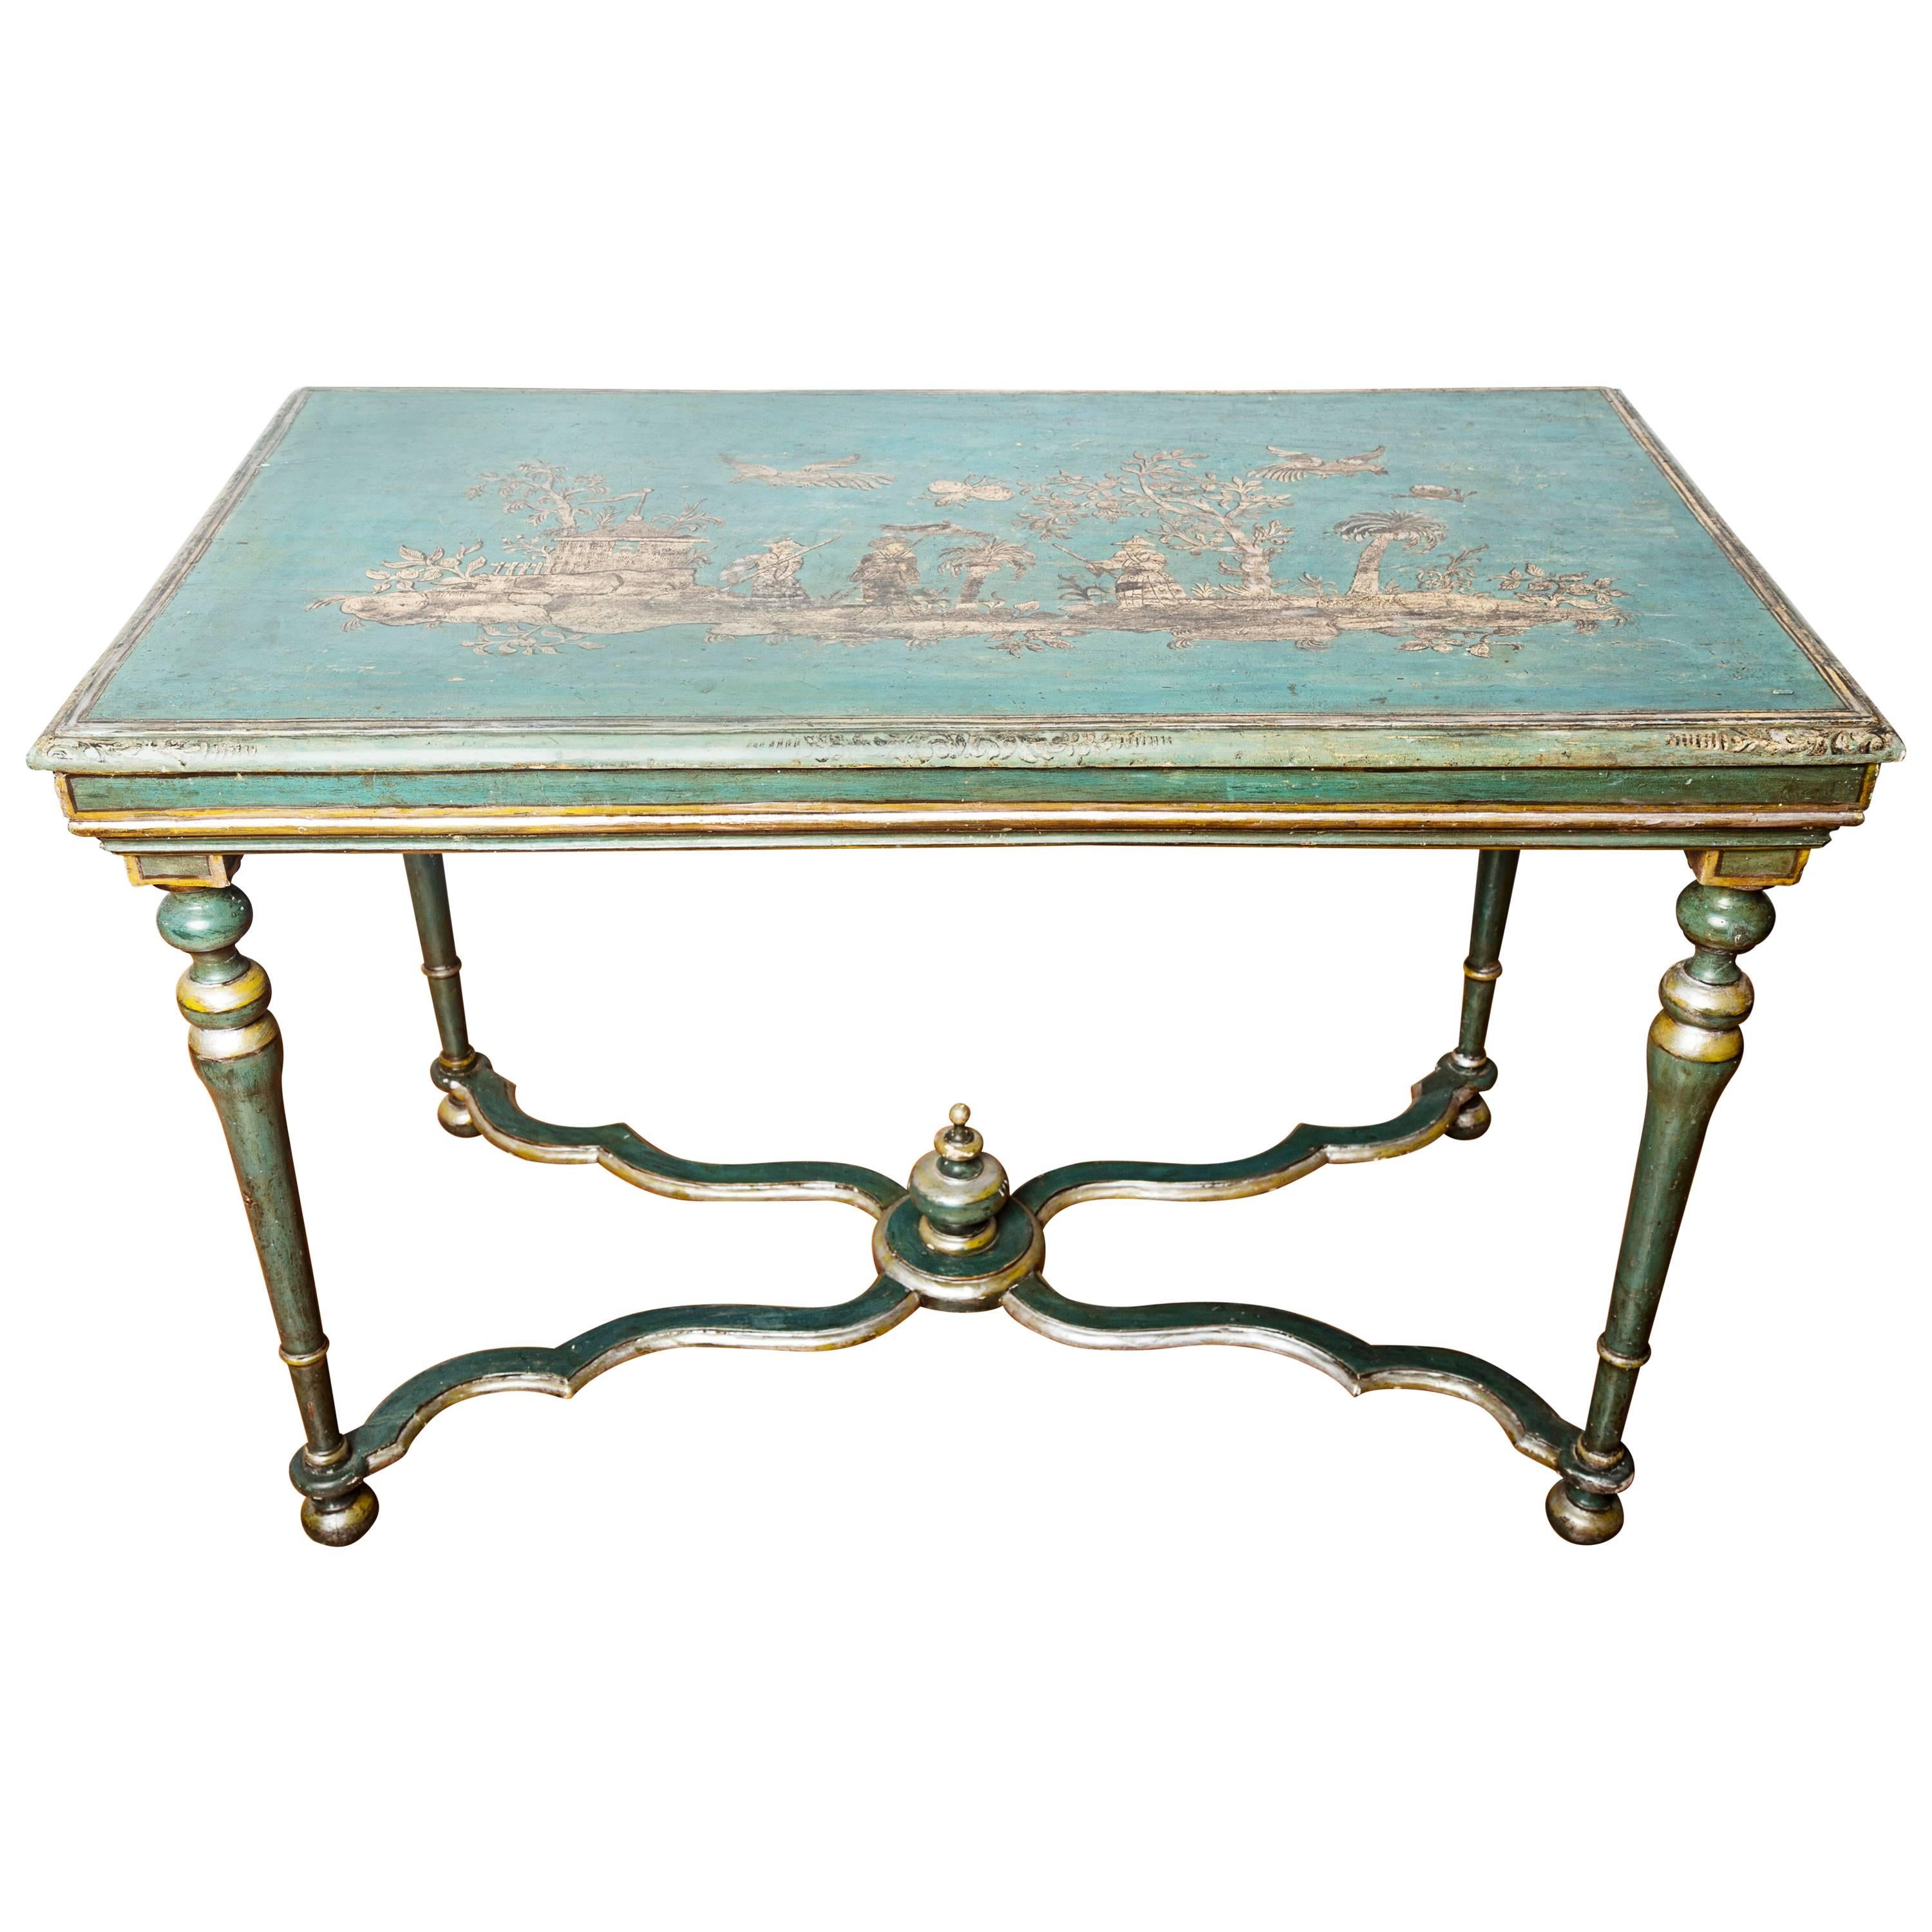 18th Century Italian Polychromed Table with Chinoiseries